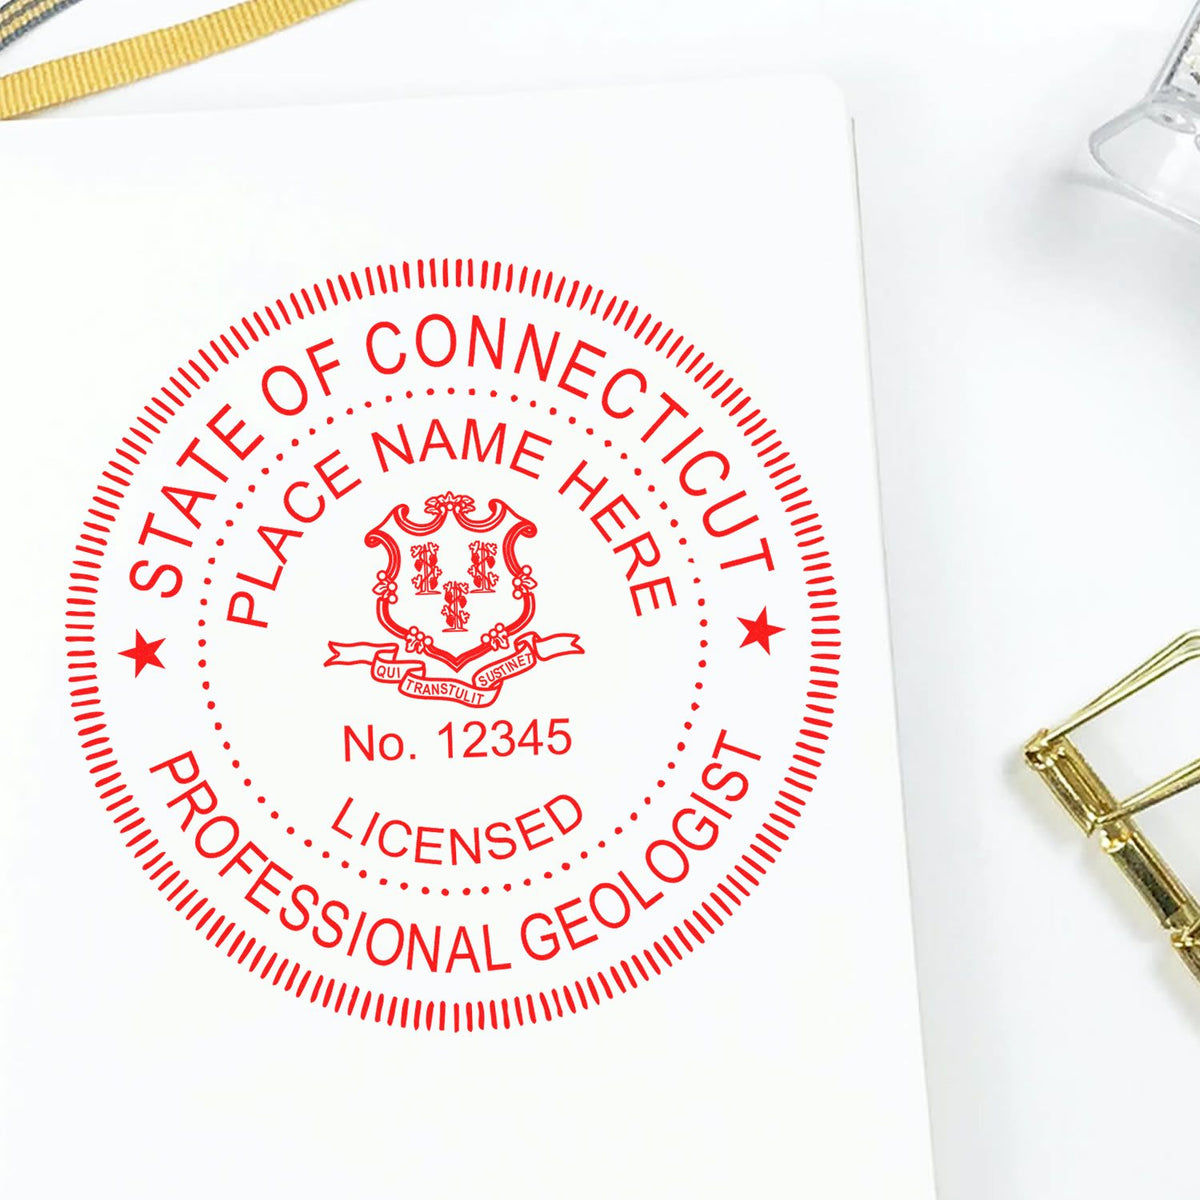 An in use photo of the Connecticut Professional Geologist Seal Stamp showing a sample imprint on a cardstock